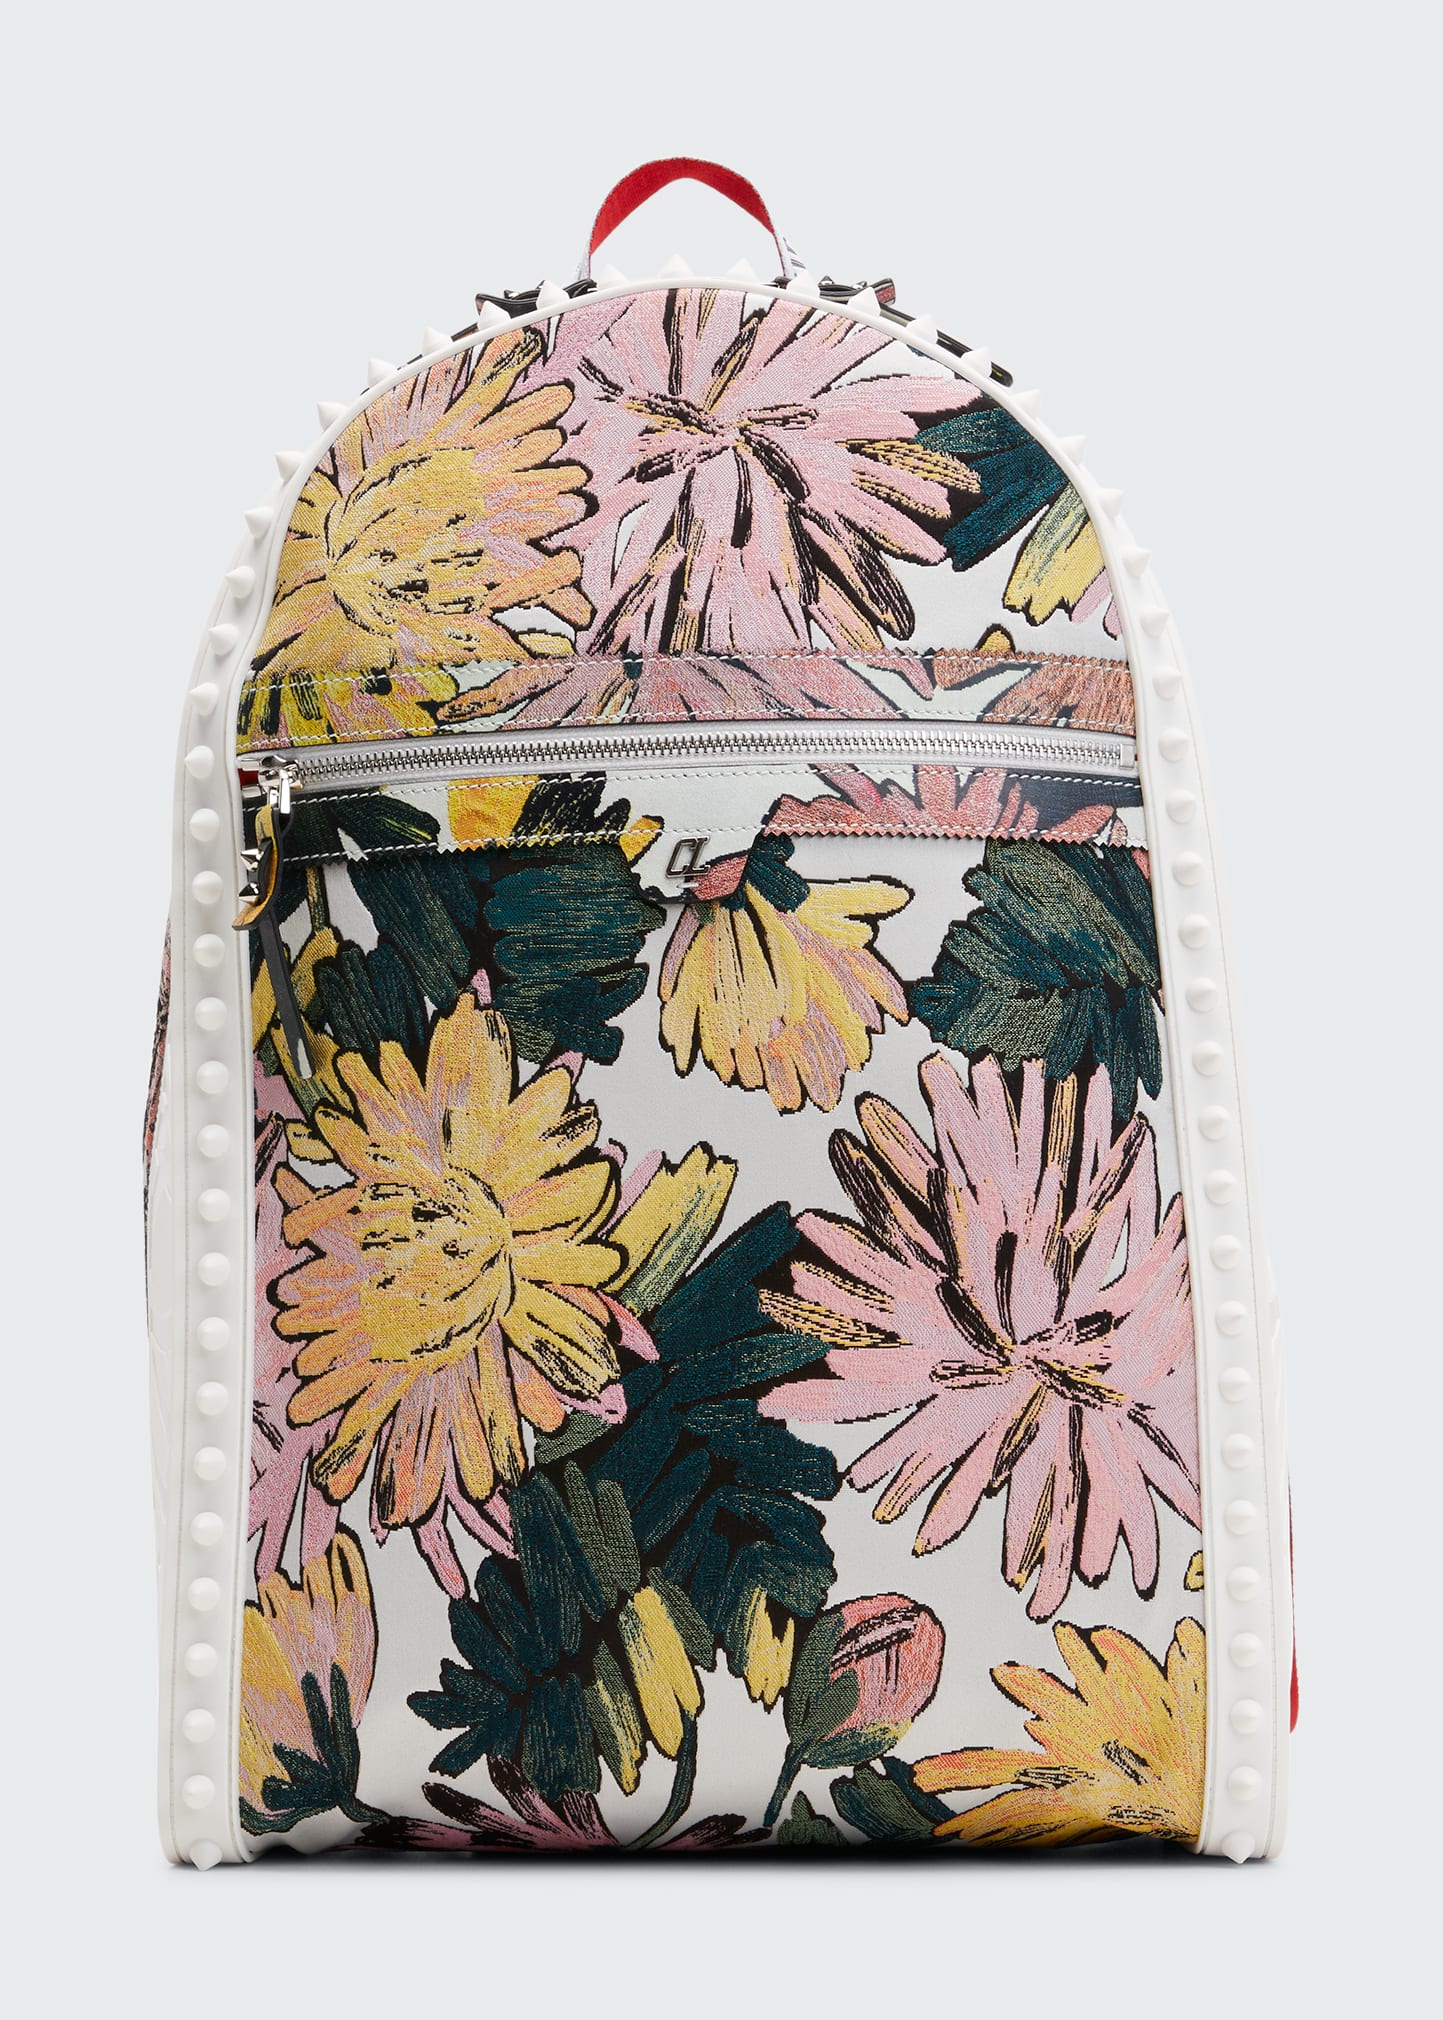 Christian Louboutin Men's Backparis Floral Fabric Backpack